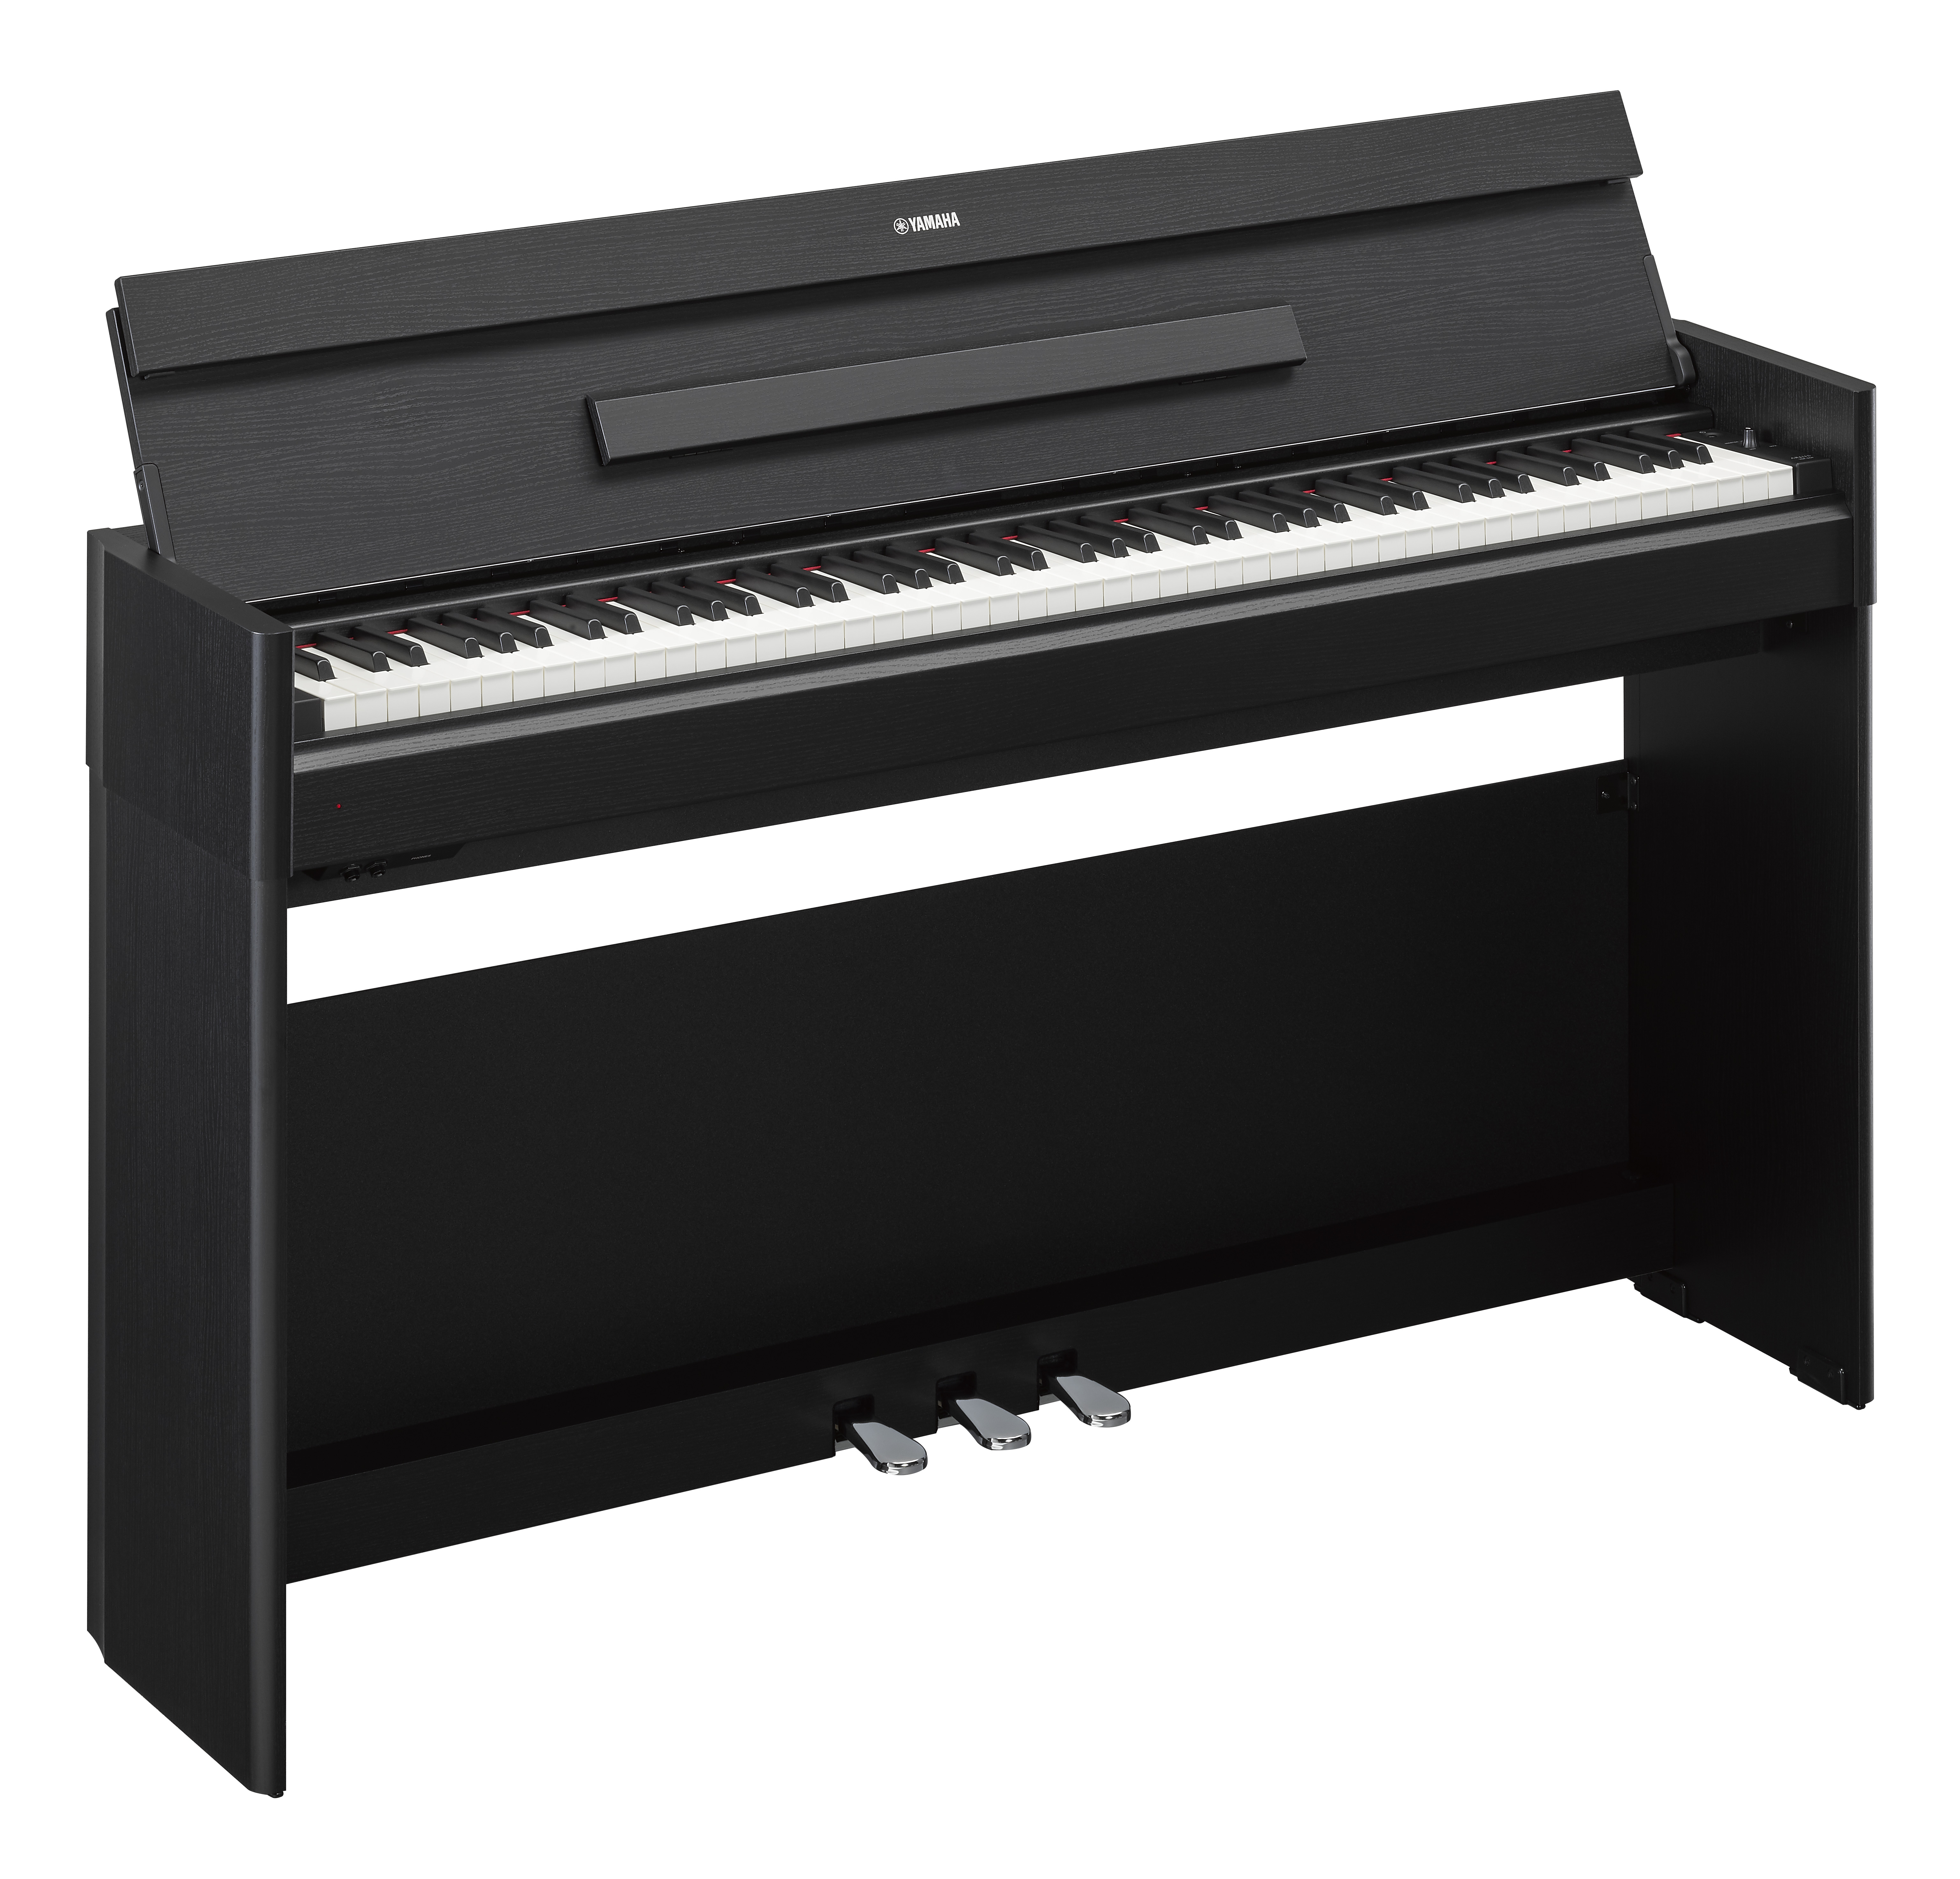 Yamaha Ydp-s54 - Black - Digital piano with stand - Variation 1